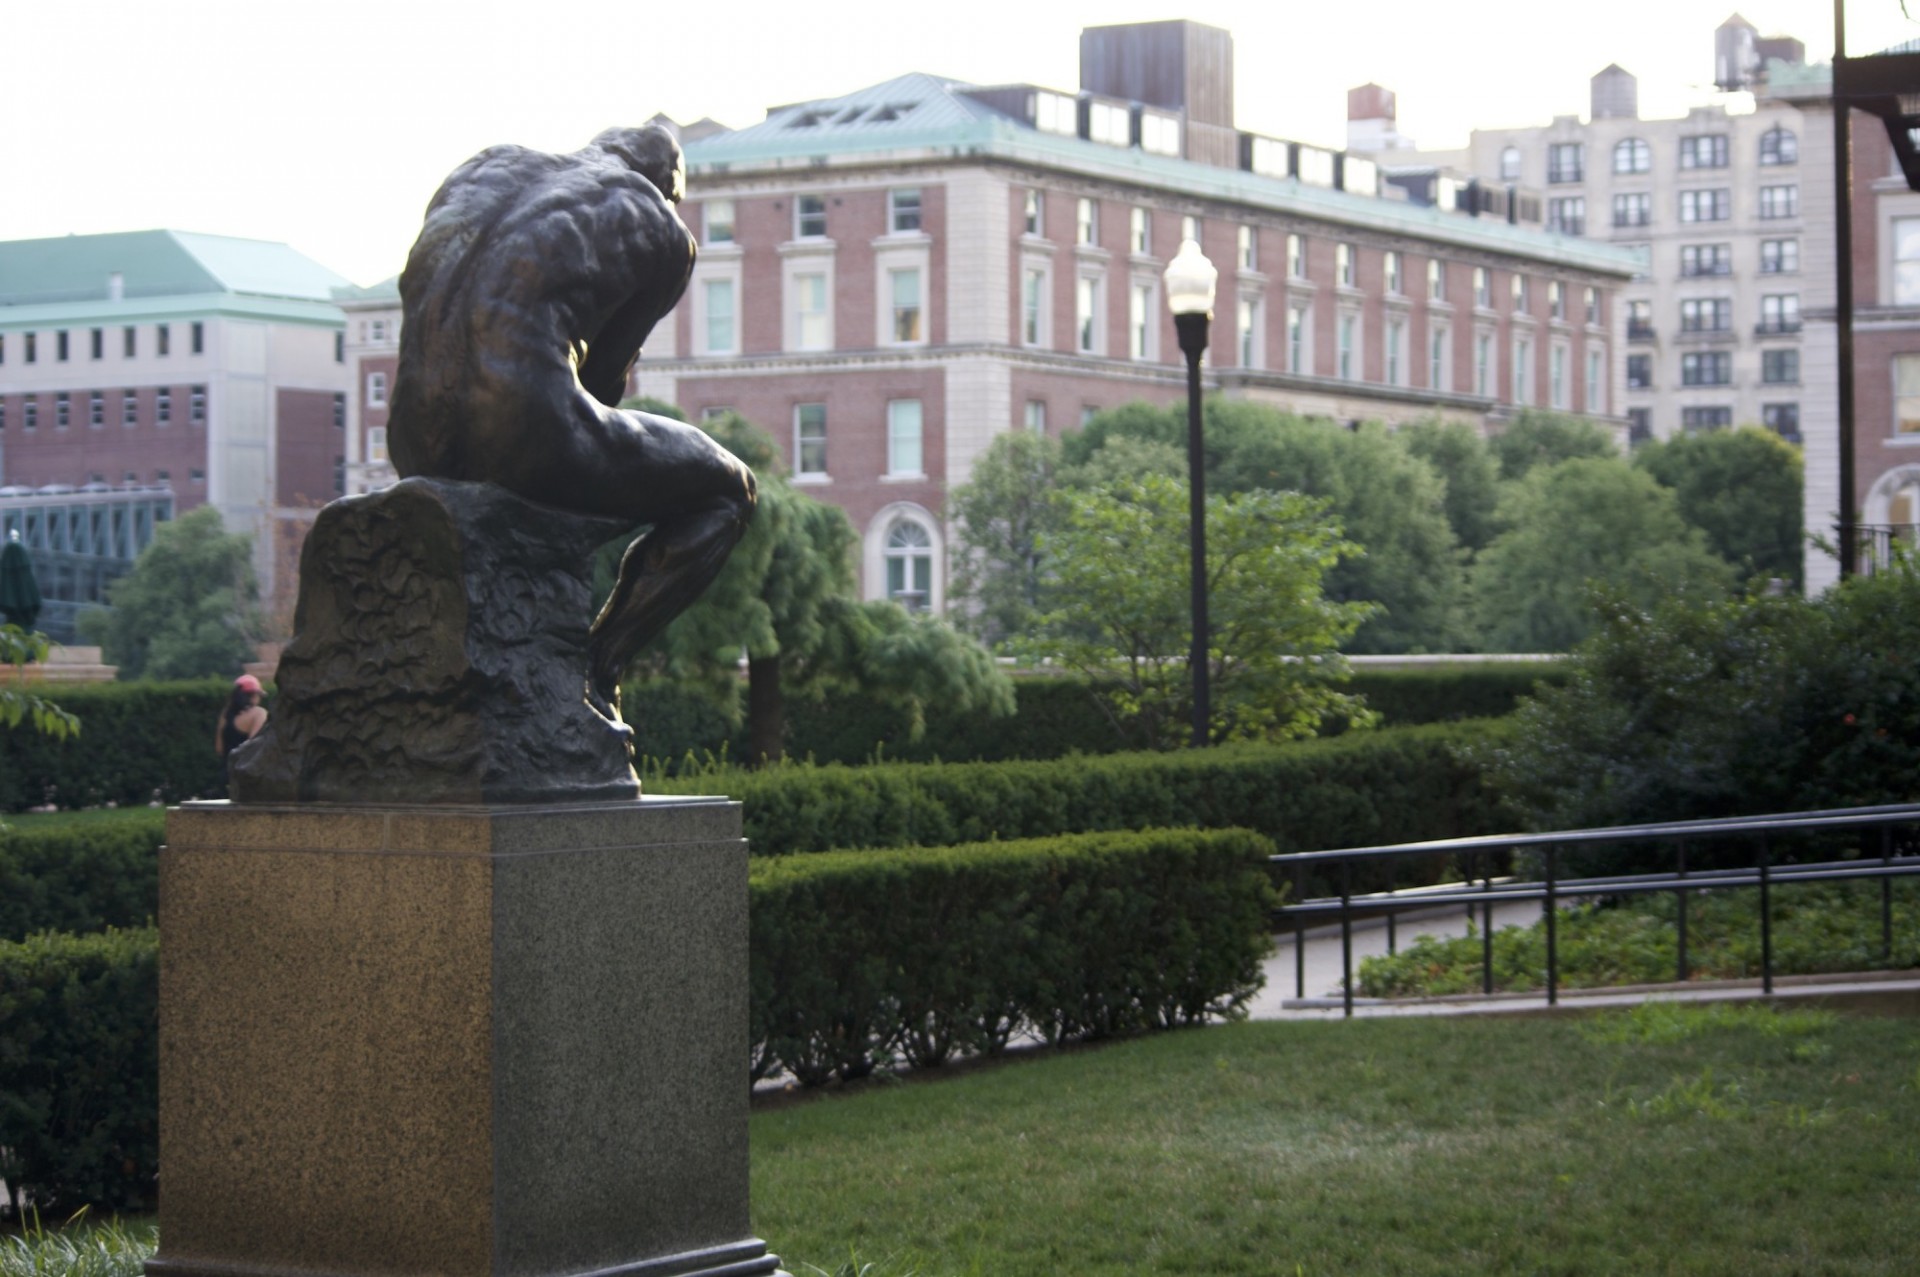 The Thinker sculpture by Rodin on Columbia's upper campus.